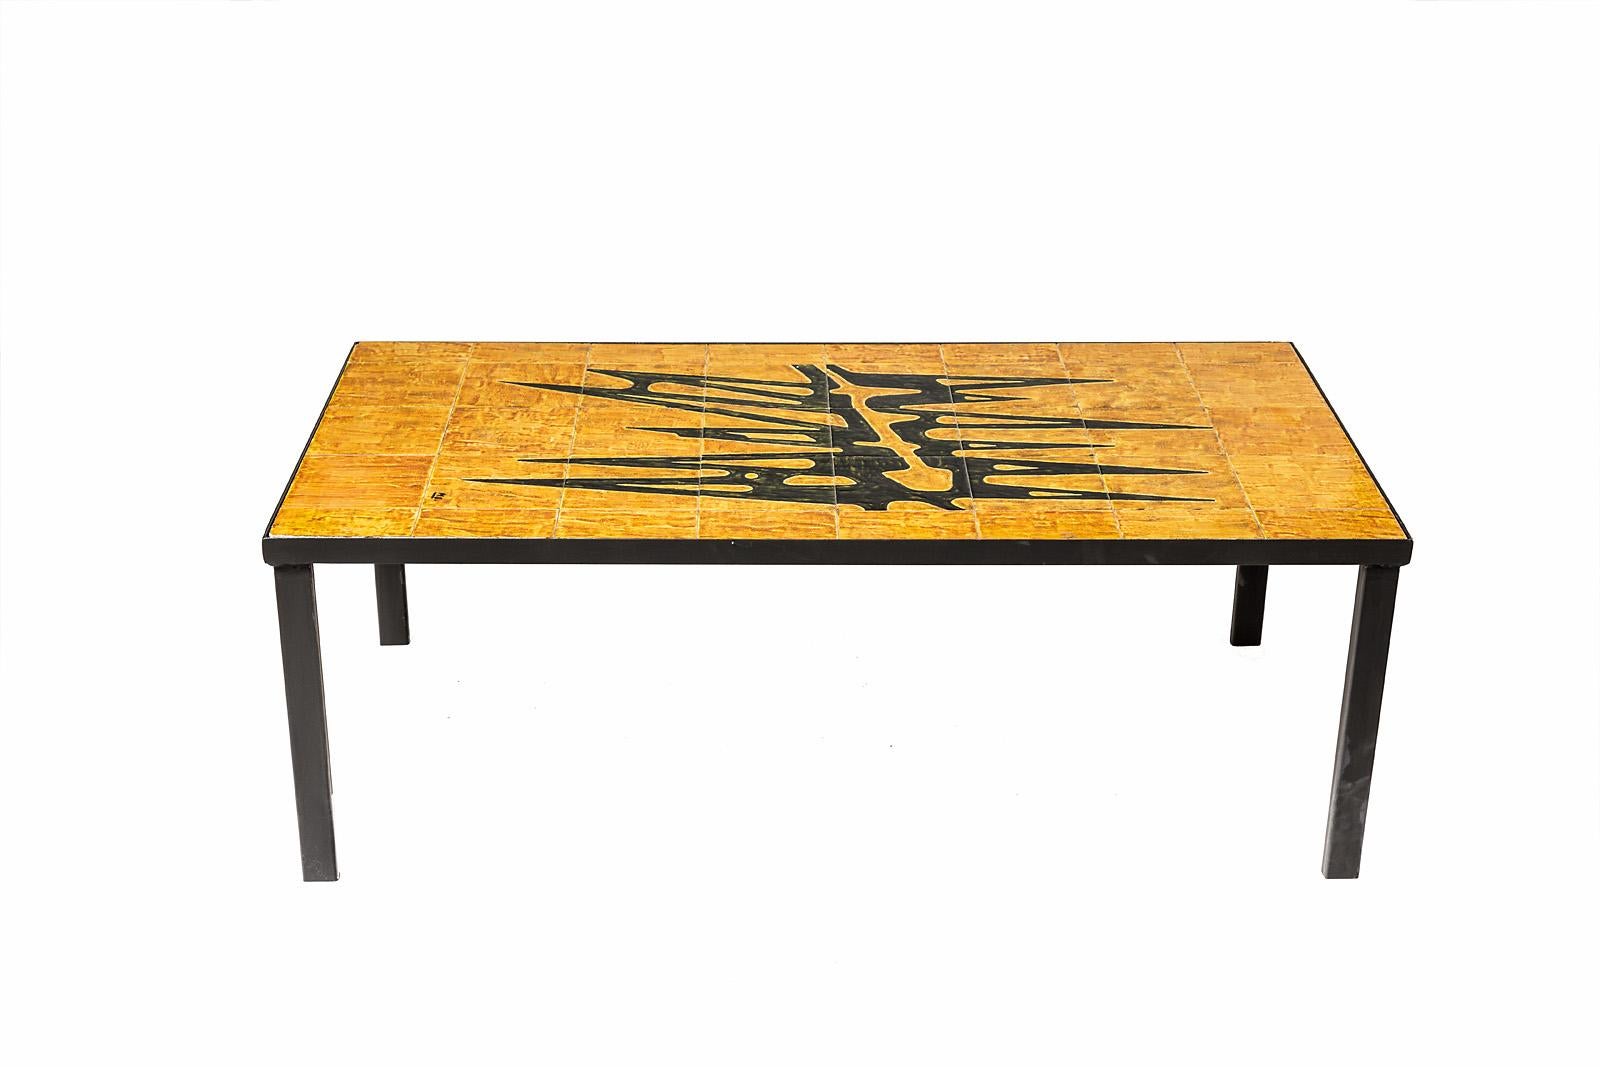 Michalinka Stuart

Elegant large and low ceramic coffee table .

Beautiful abstract drawing by the artist.

Signed and realized, circa 1970.

Black metal feet table.

Beautiful ceramic glaze color.